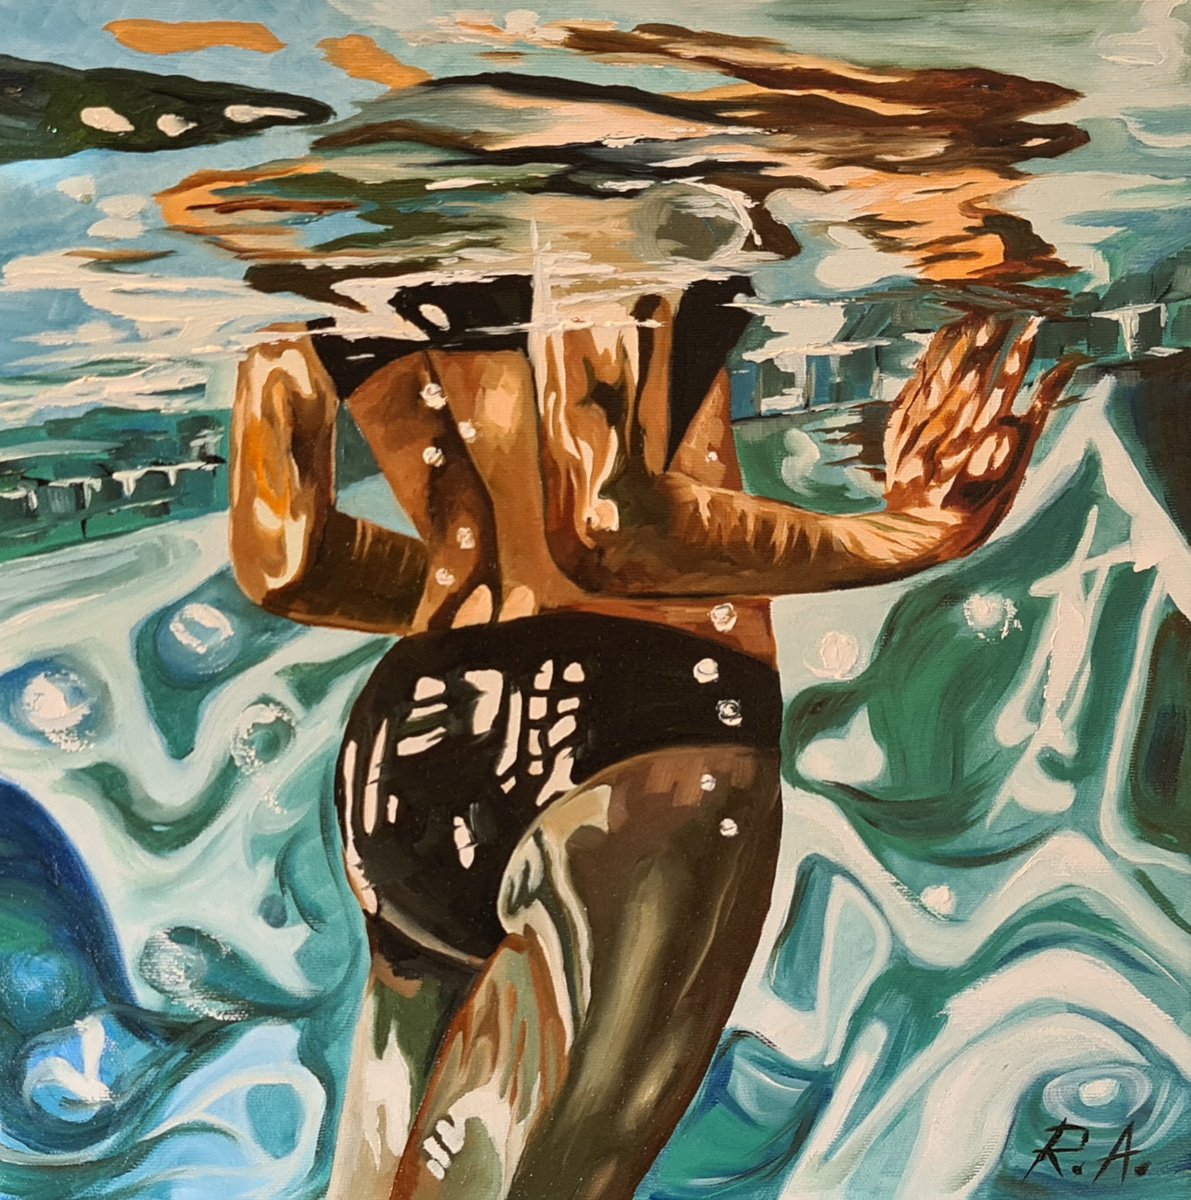 Underwater - woman in the pool; oil painting 40*40 cm by Anna Reznik